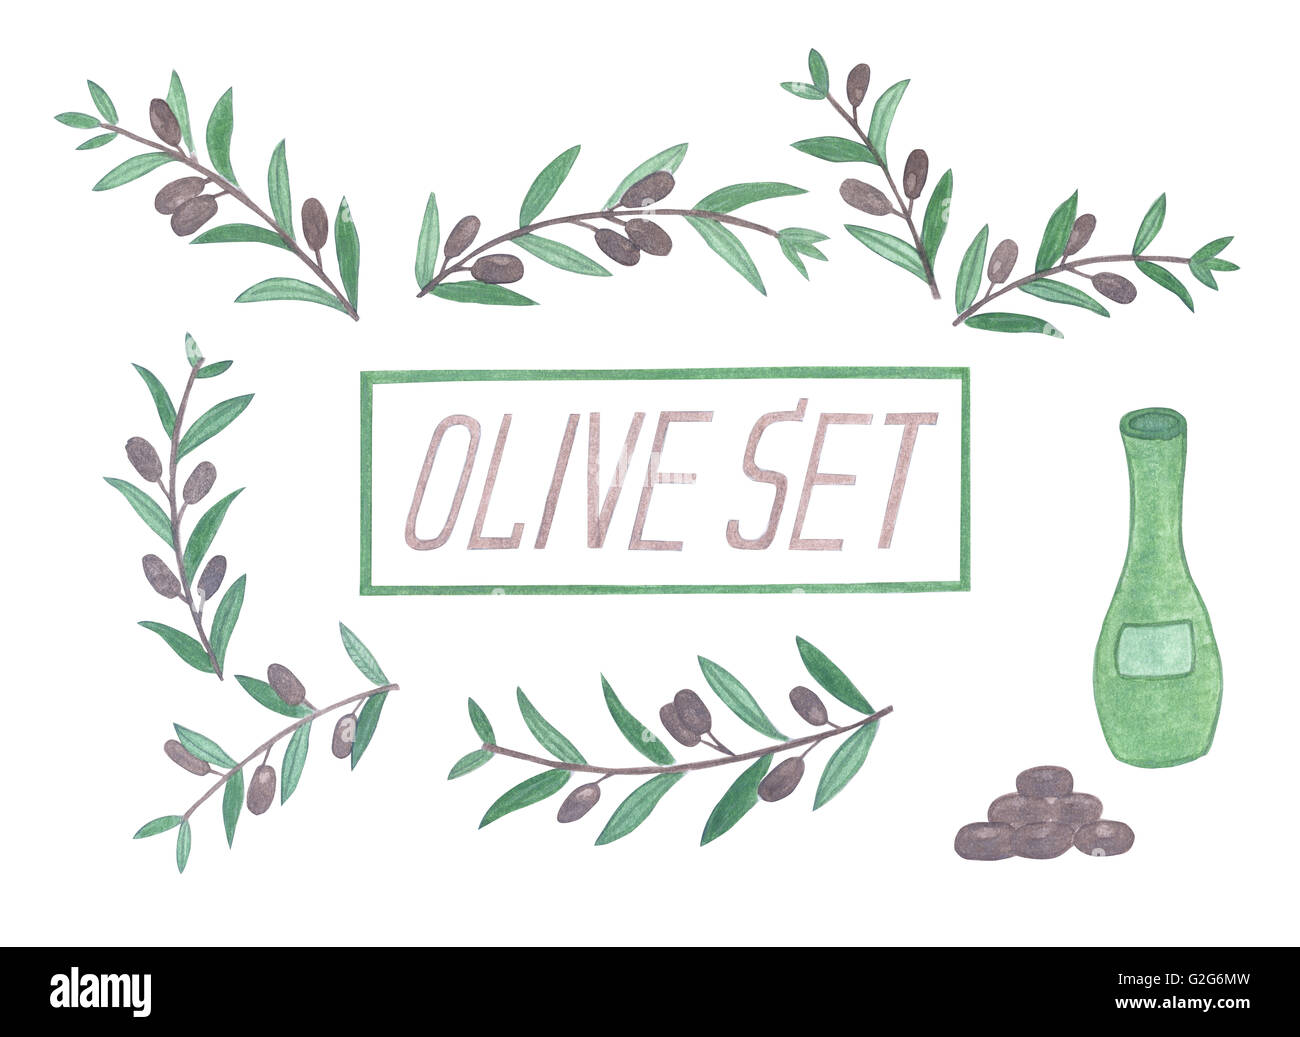 Set of watercolor olive branches. Isolated illustration on white background. Organic and natural concept. Stock Photo